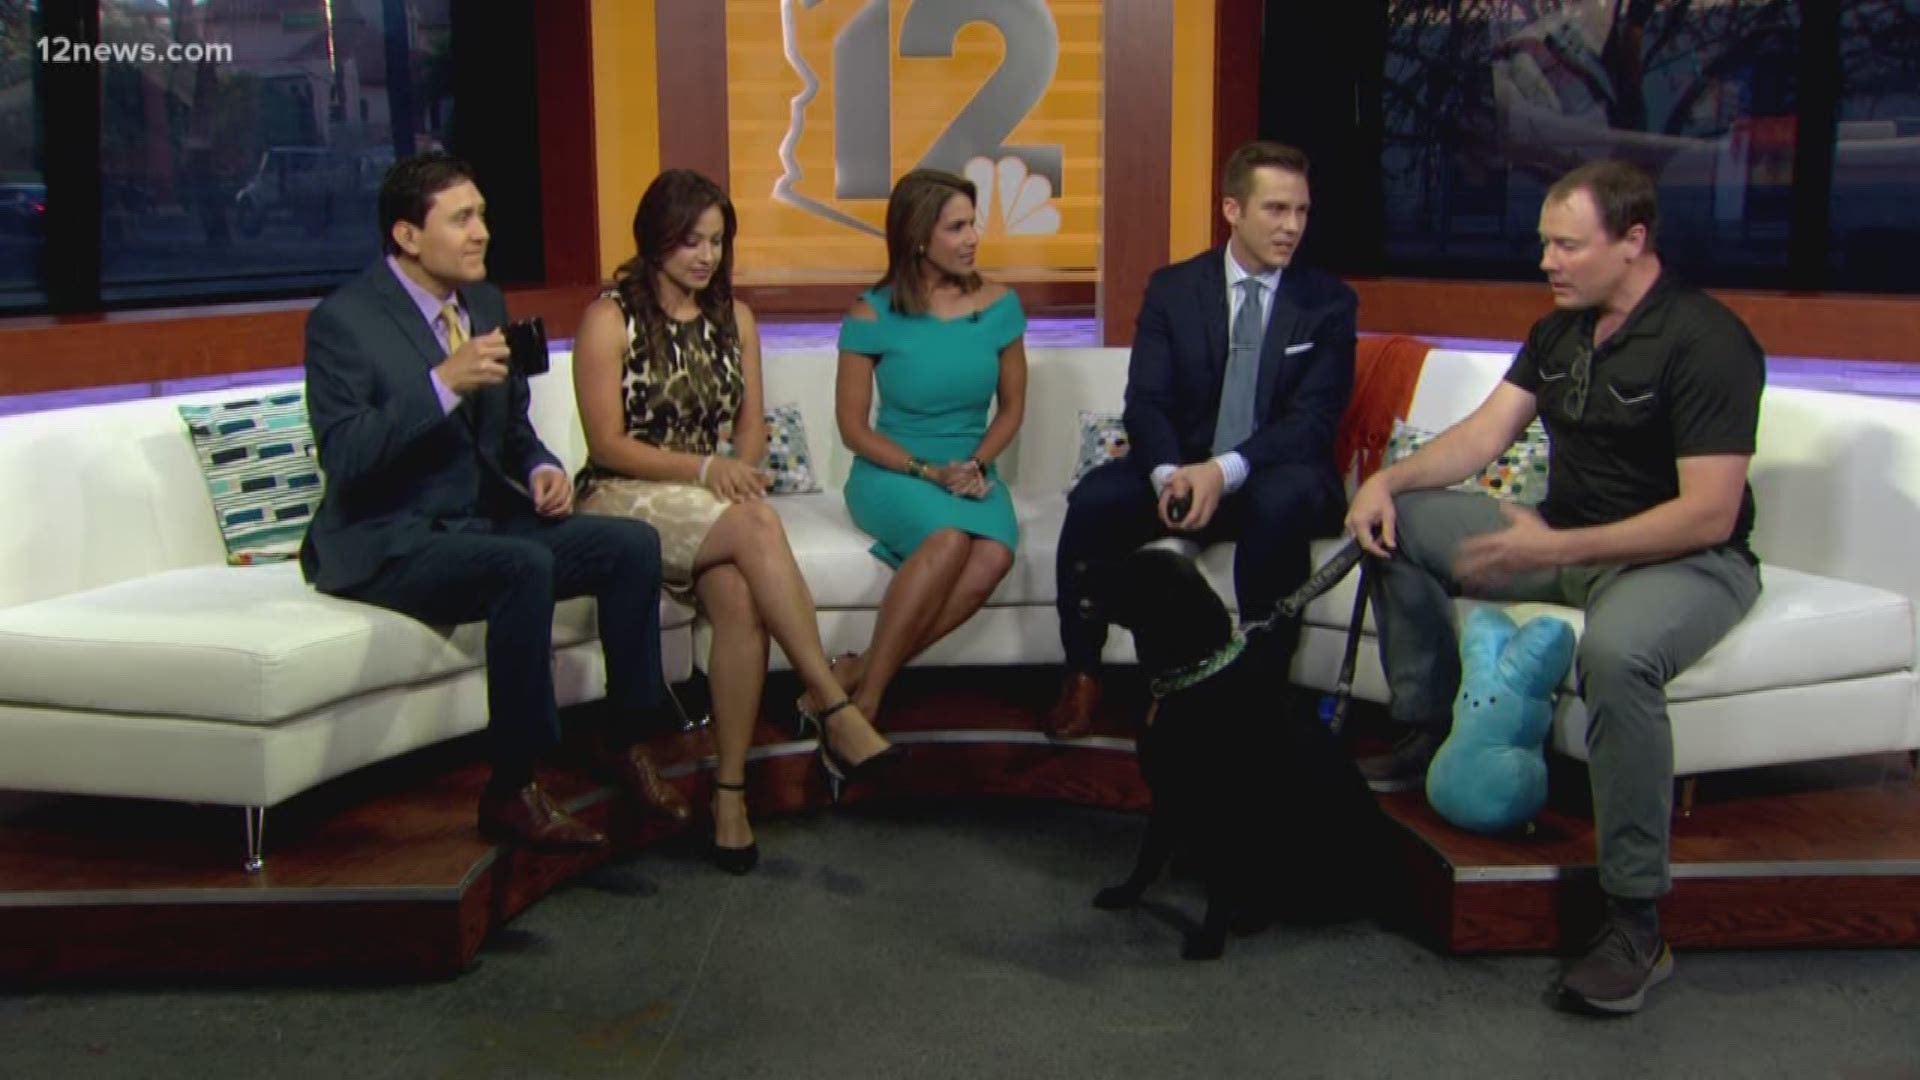 Dr. Brett Cordes, a.k.a. Brett the Vet, from Arizona Animal Hospital, chats with the Today in AZ team to share tips on keeping your dogs safe during the warm summer months.